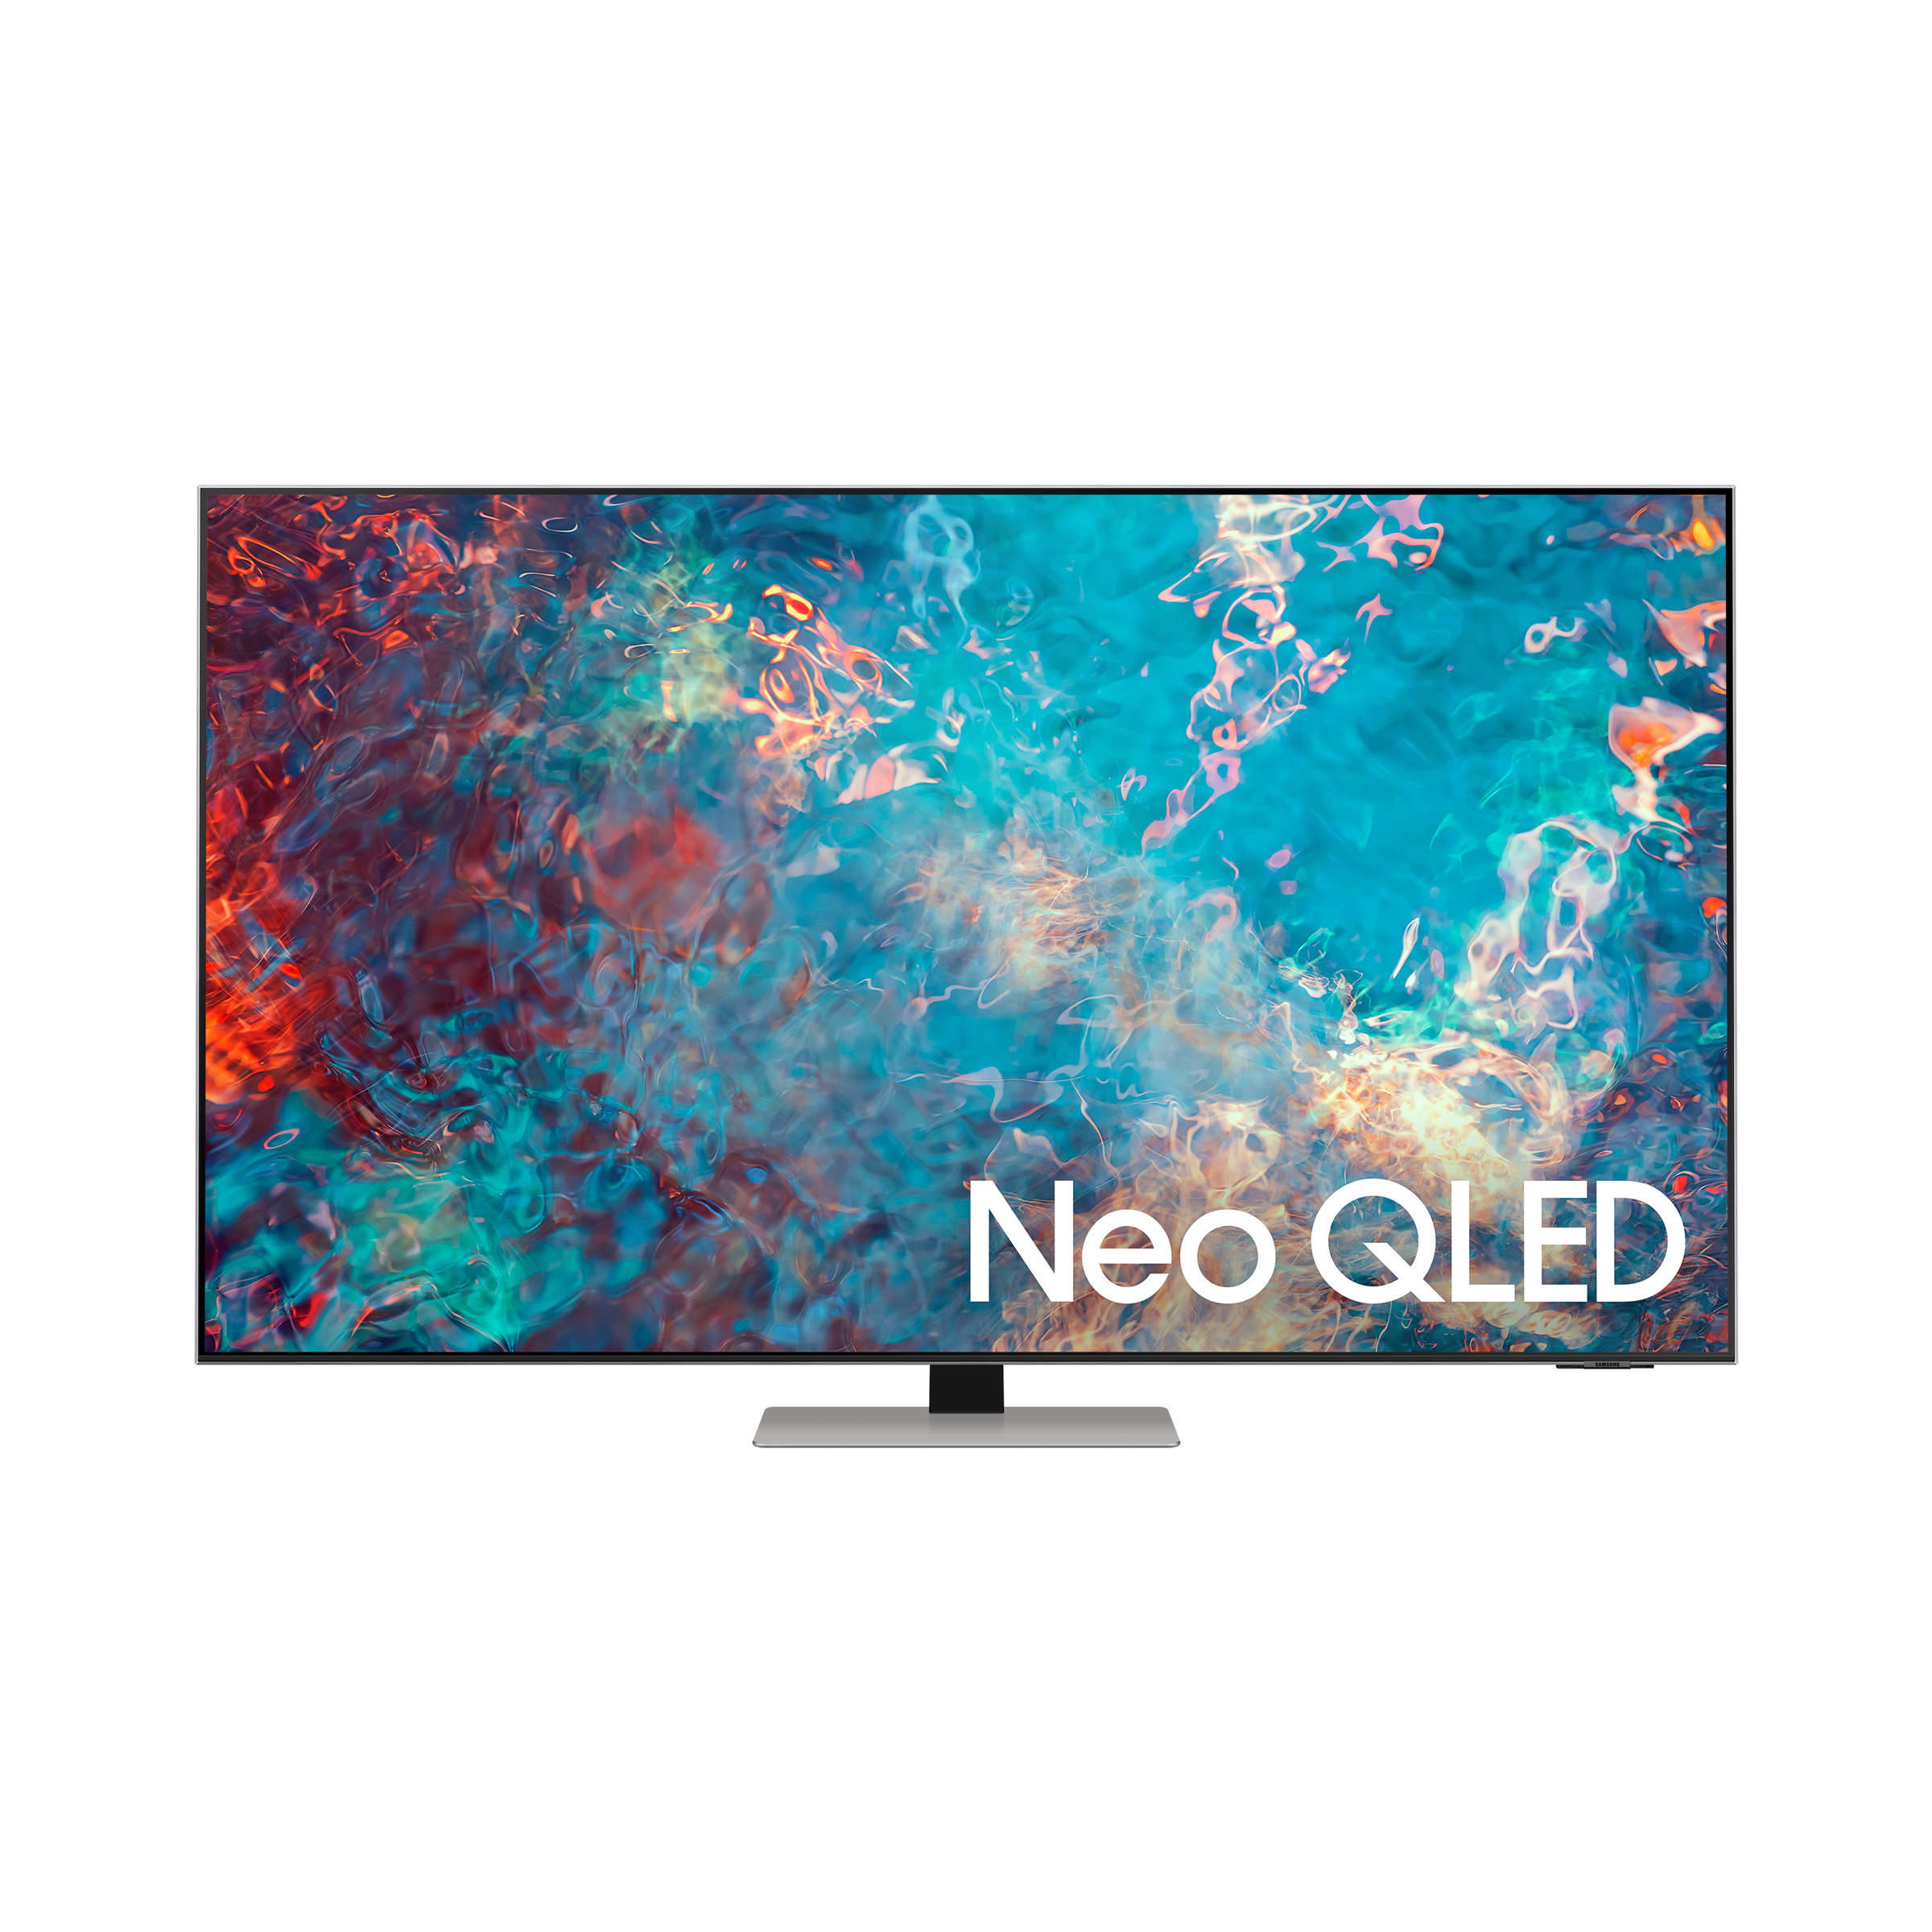 SAMSUNG Series 8 189 cm (75 inch) QLED 4K Ultra HD Tizen TV with Alexa Compatibility (2021 model)_1